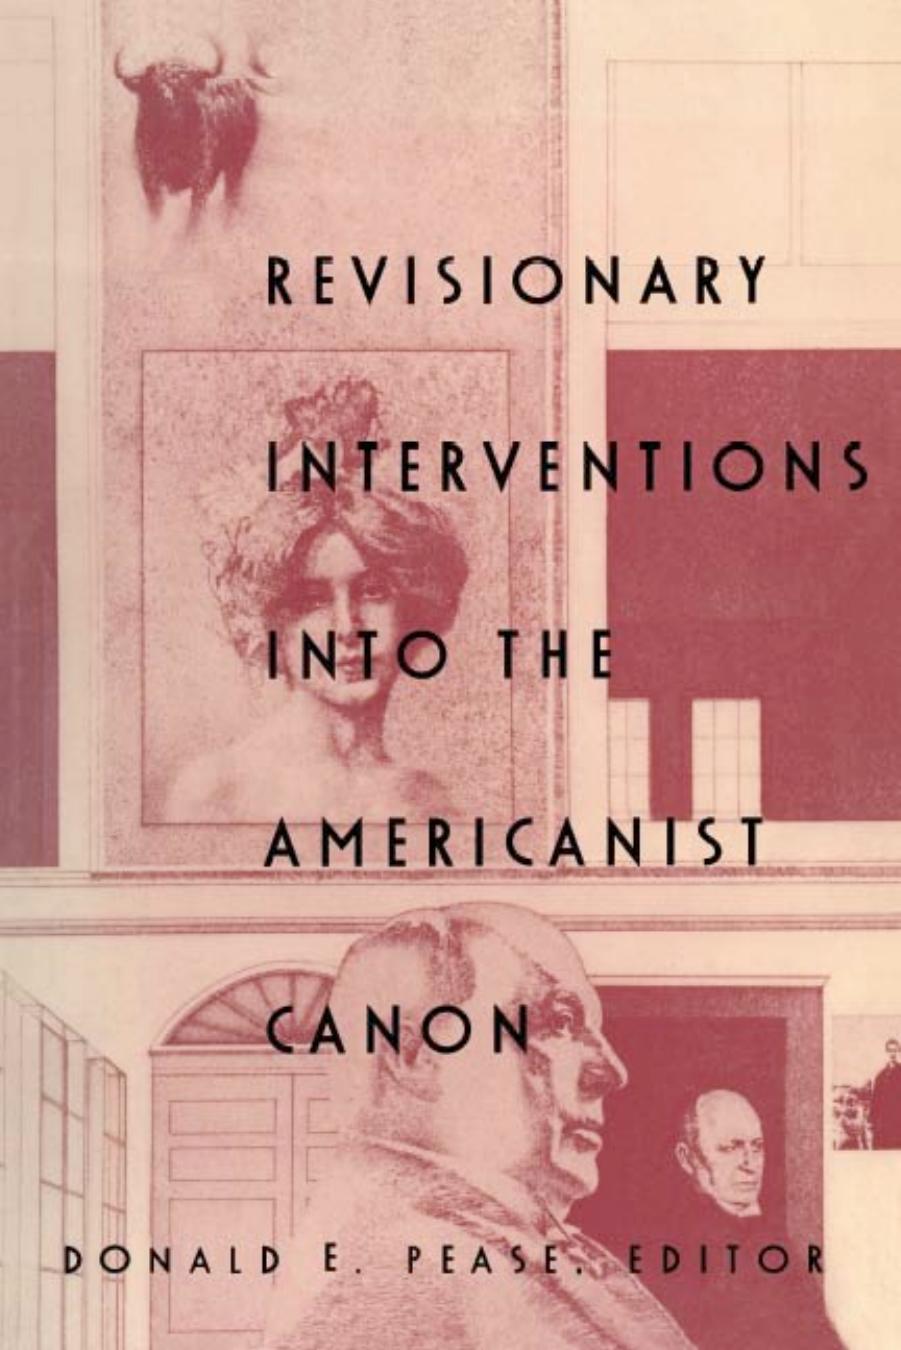 Revisionary Interventions into the Americanist Canon by Donald E. Pease; Michael Warner; John McWilliams; Wai Chee Dimock